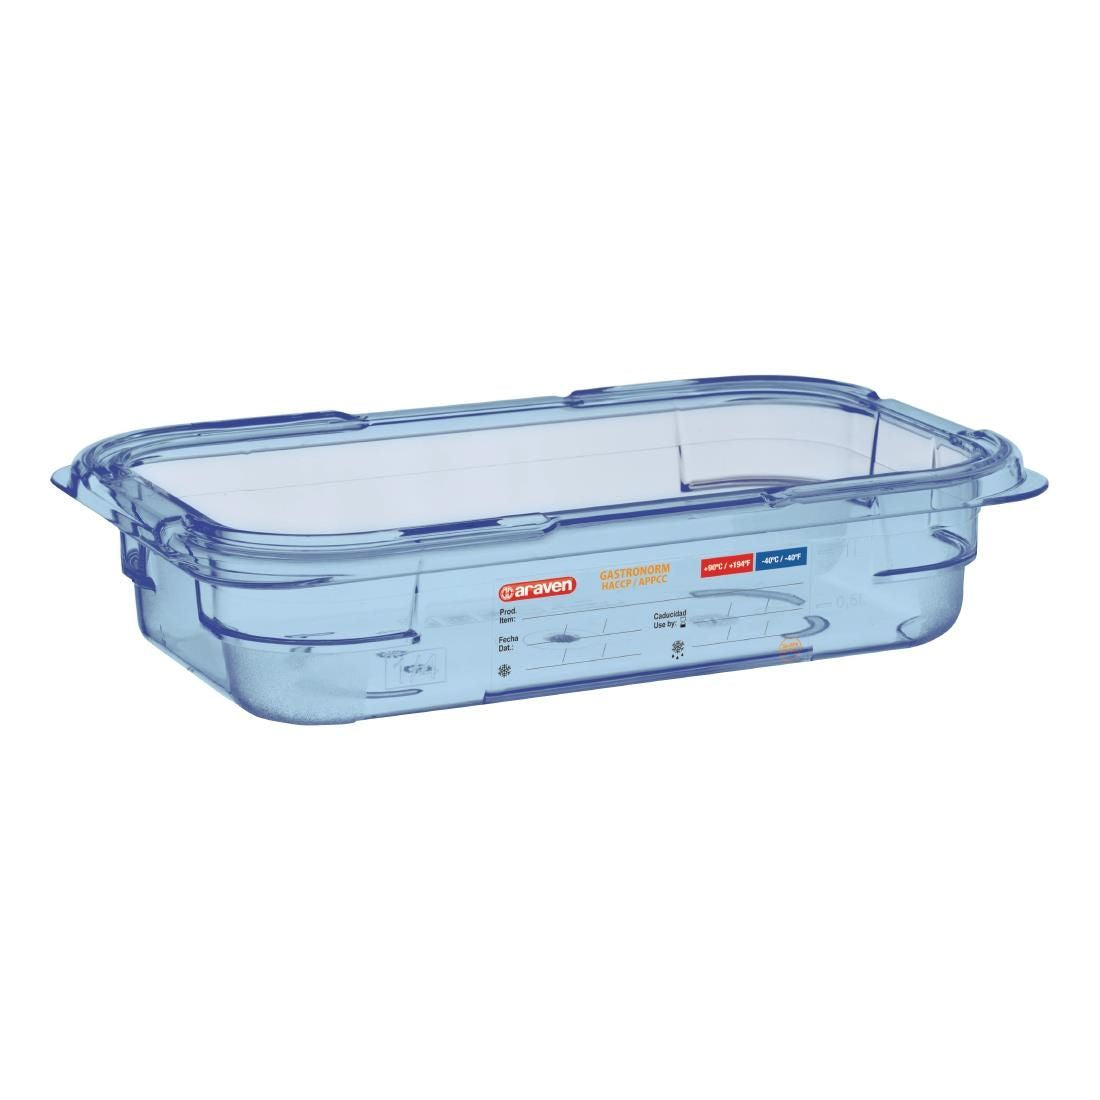 GP574 Araven ABS Food Storage Container Blue GN 1/4 65mm JD Catering Equipment Solutions Ltd